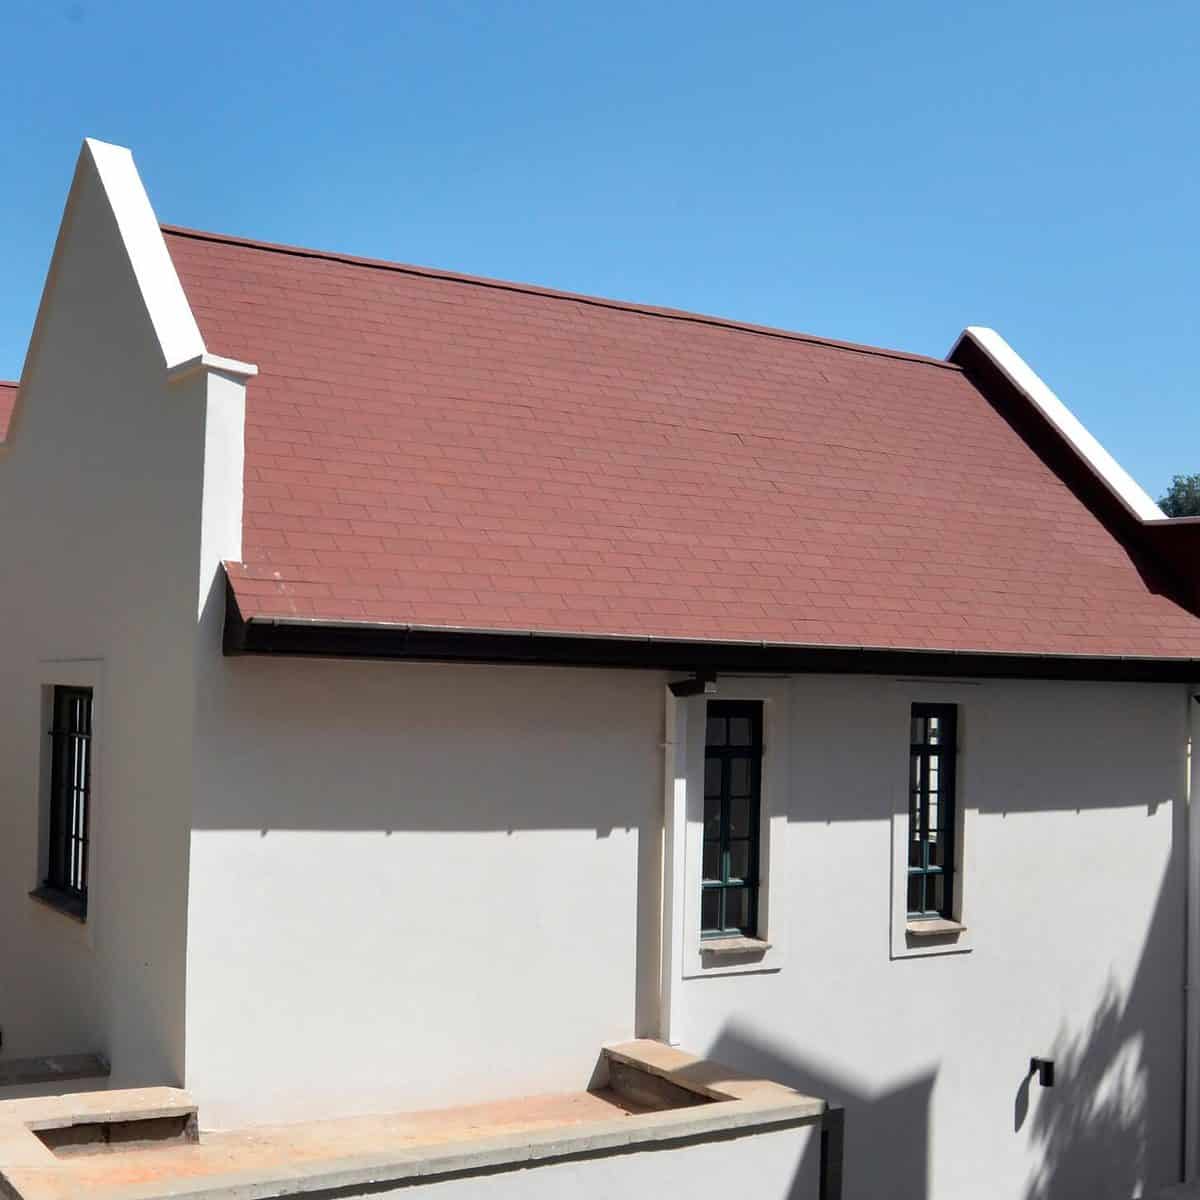 Superglass Roofing Shingles: Runda Roofing Project